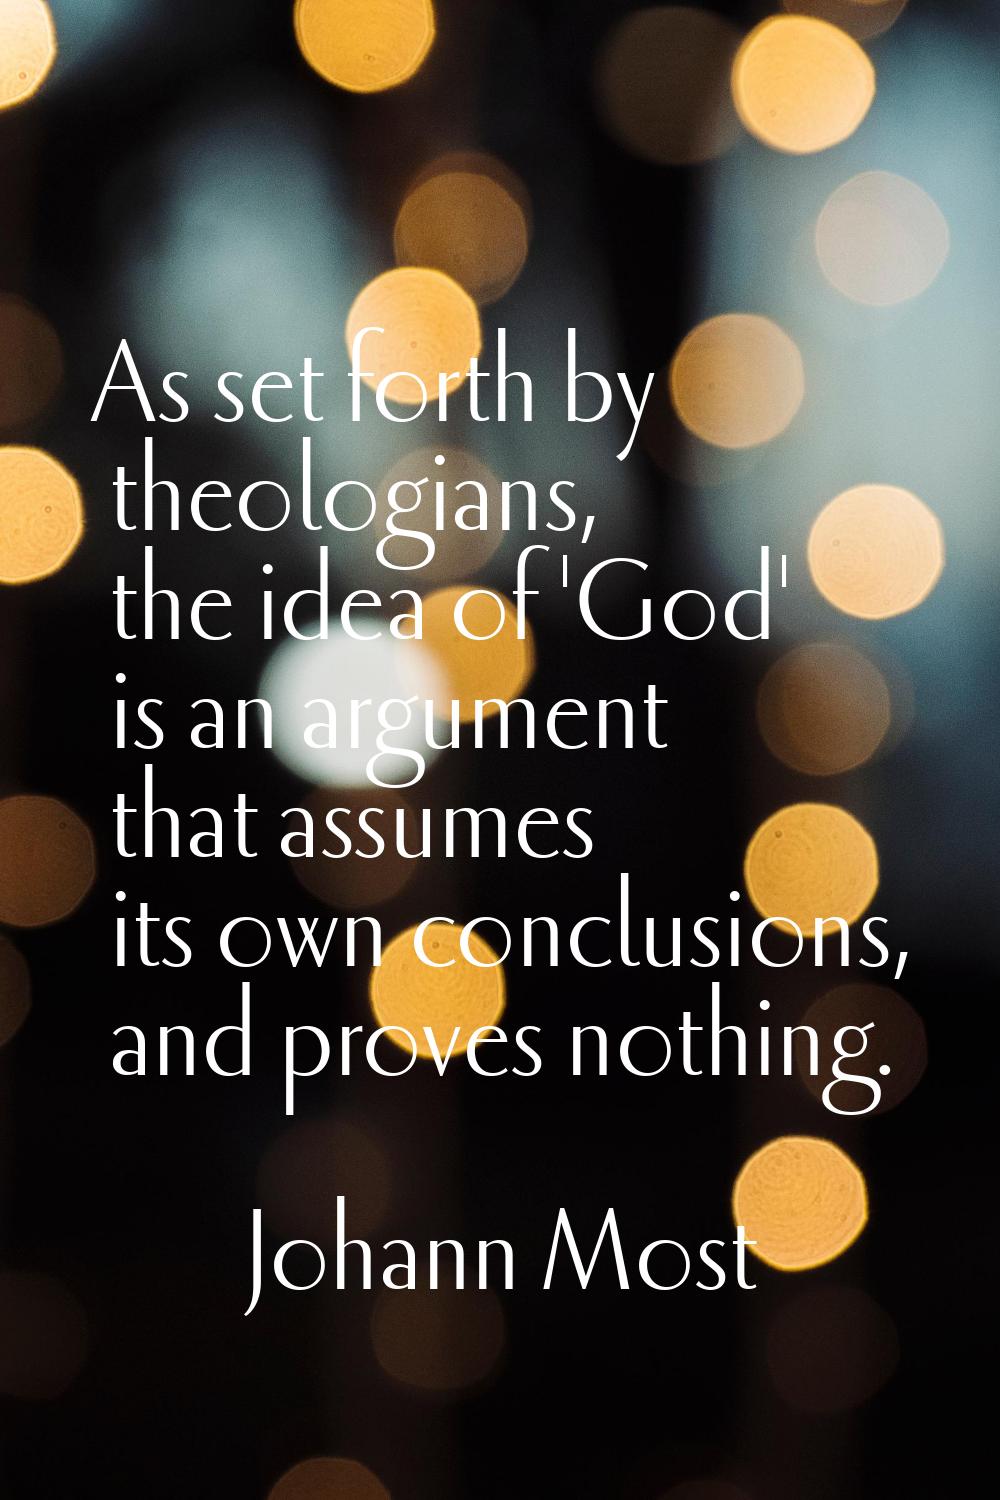 As set forth by theologians, the idea of 'God' is an argument that assumes its own conclusions, and